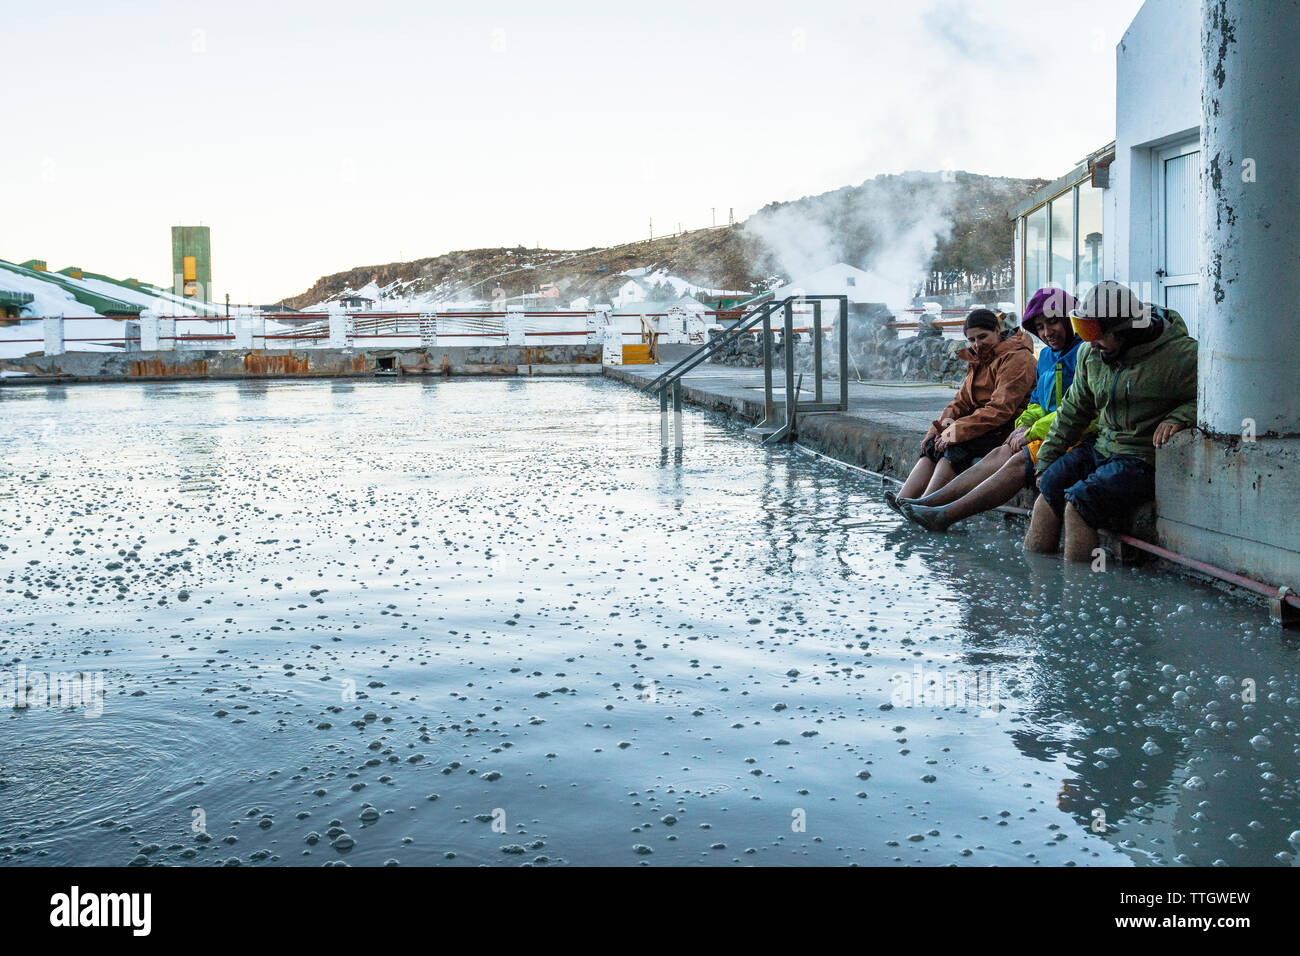 Three people soak their feet in a mud bath after a day of snowboarding Stock Photo